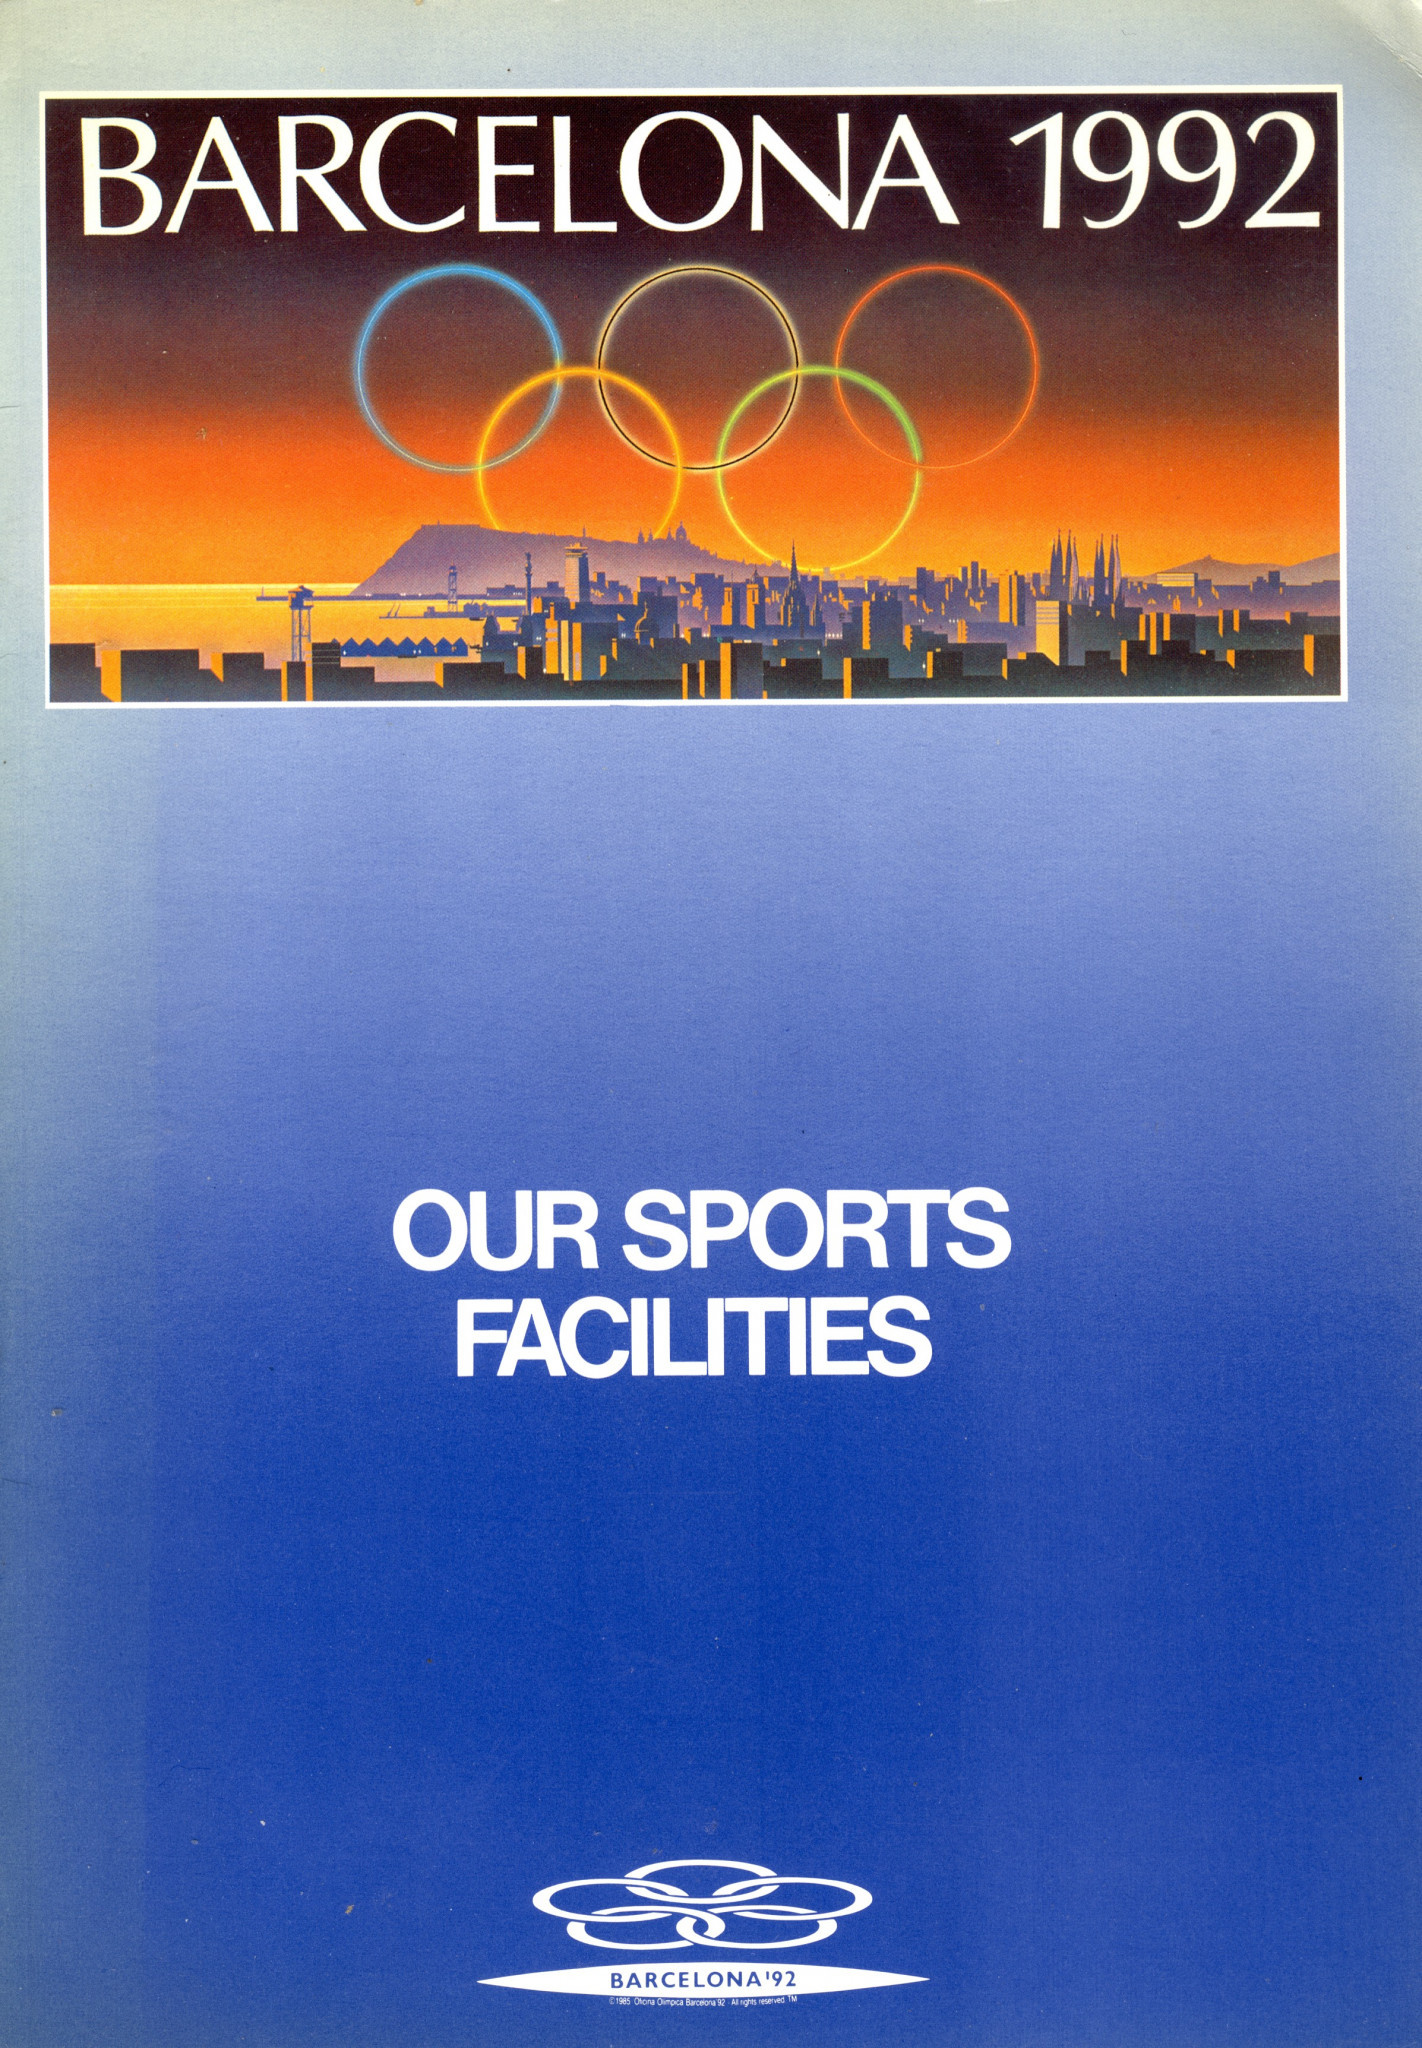 In 1986, Barcelona were chosen to host the 1992 Summer Olympics at a vote in Lausanne ©Barcelona 1992